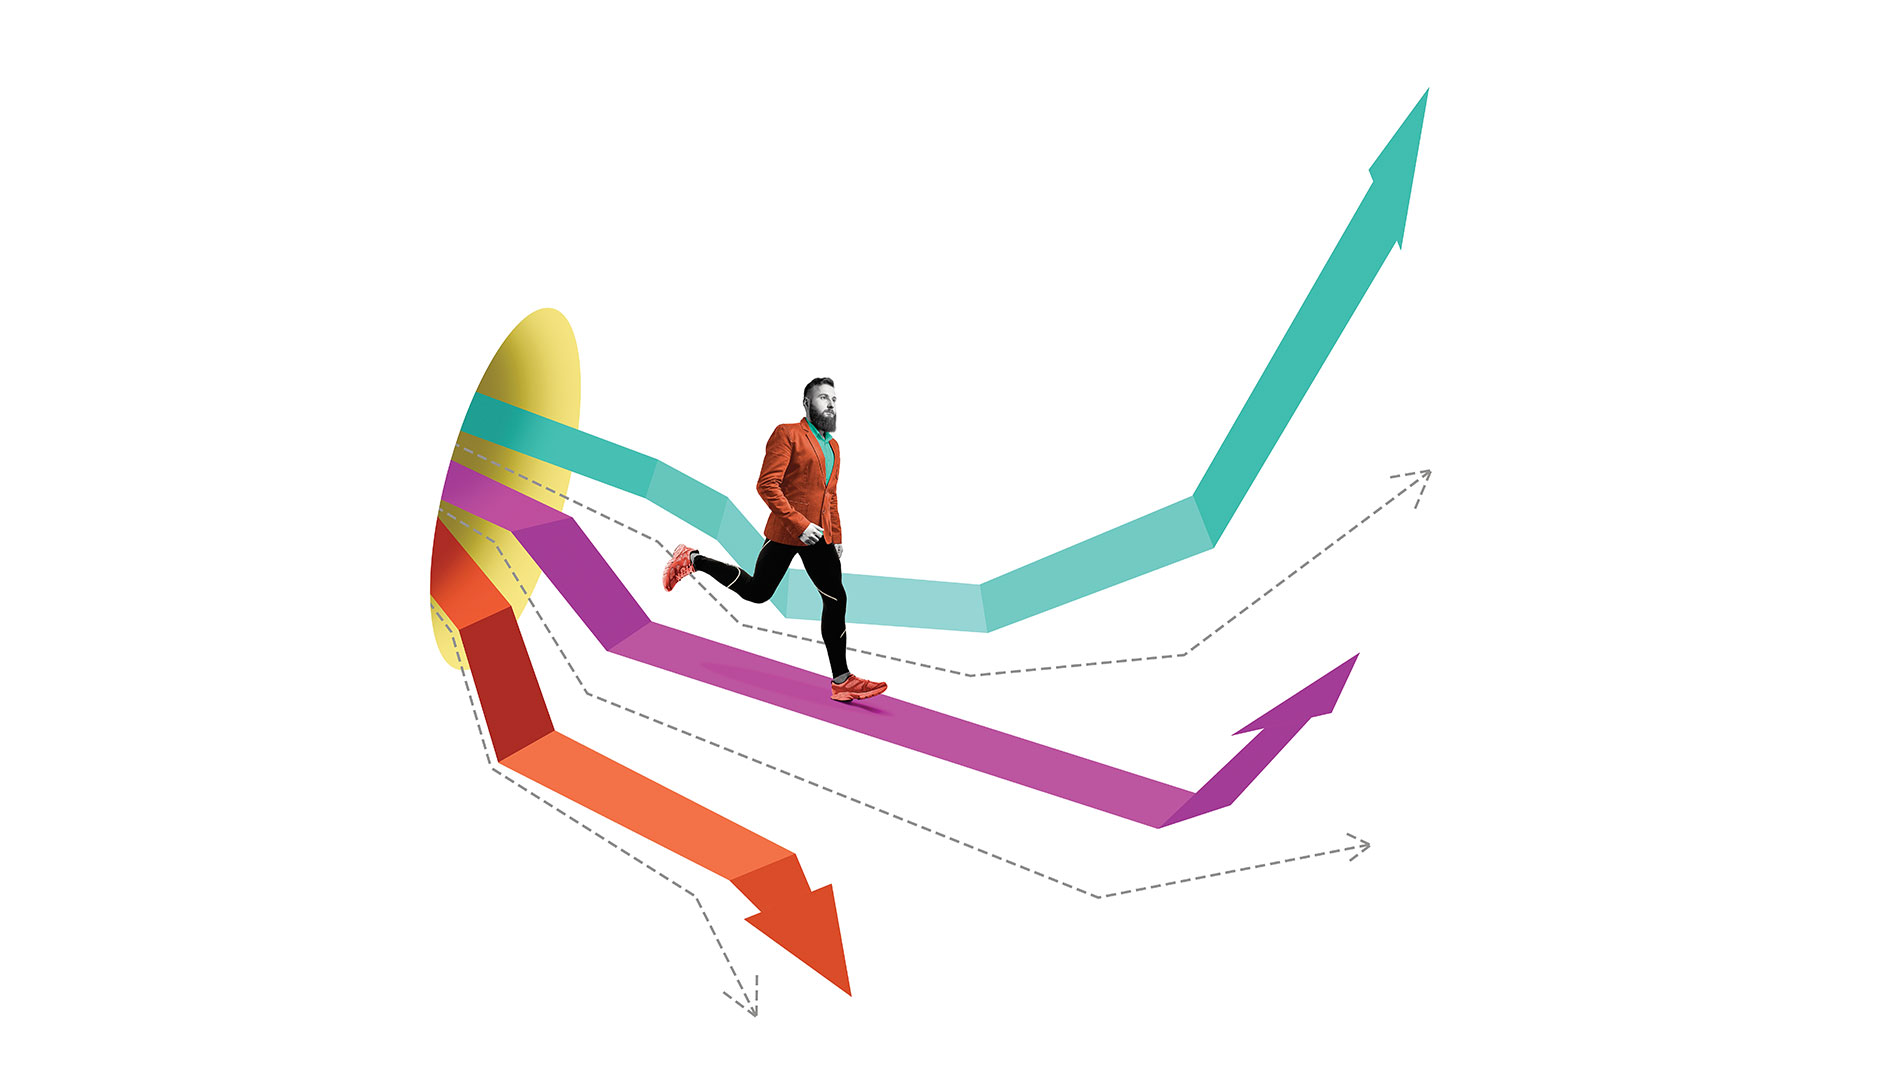 Illustration of a man running on angled arrows coming out of a hole. Image by Shutterstock / Svetazi.